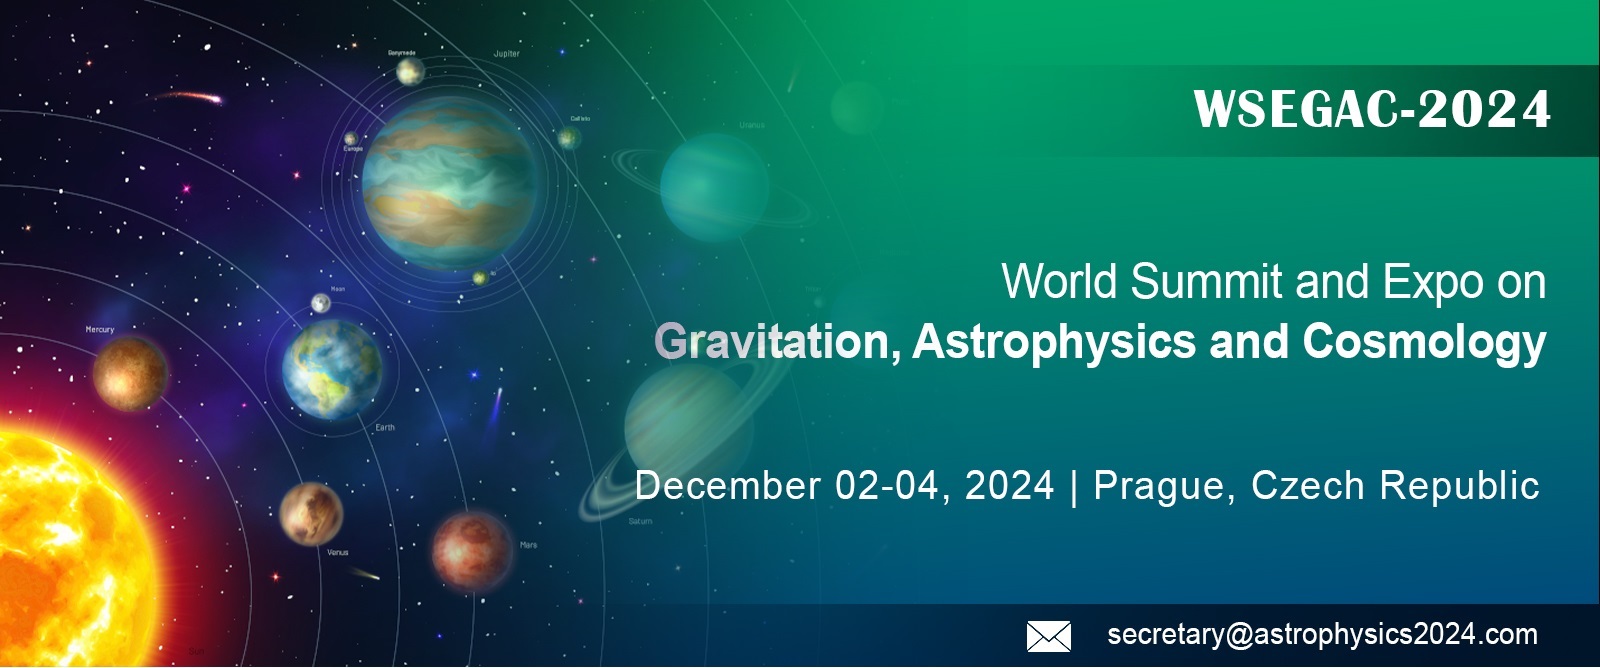 World Summit and Expo on Gravitation, Astrophysics and Cosmology(WSEGAC-2024)